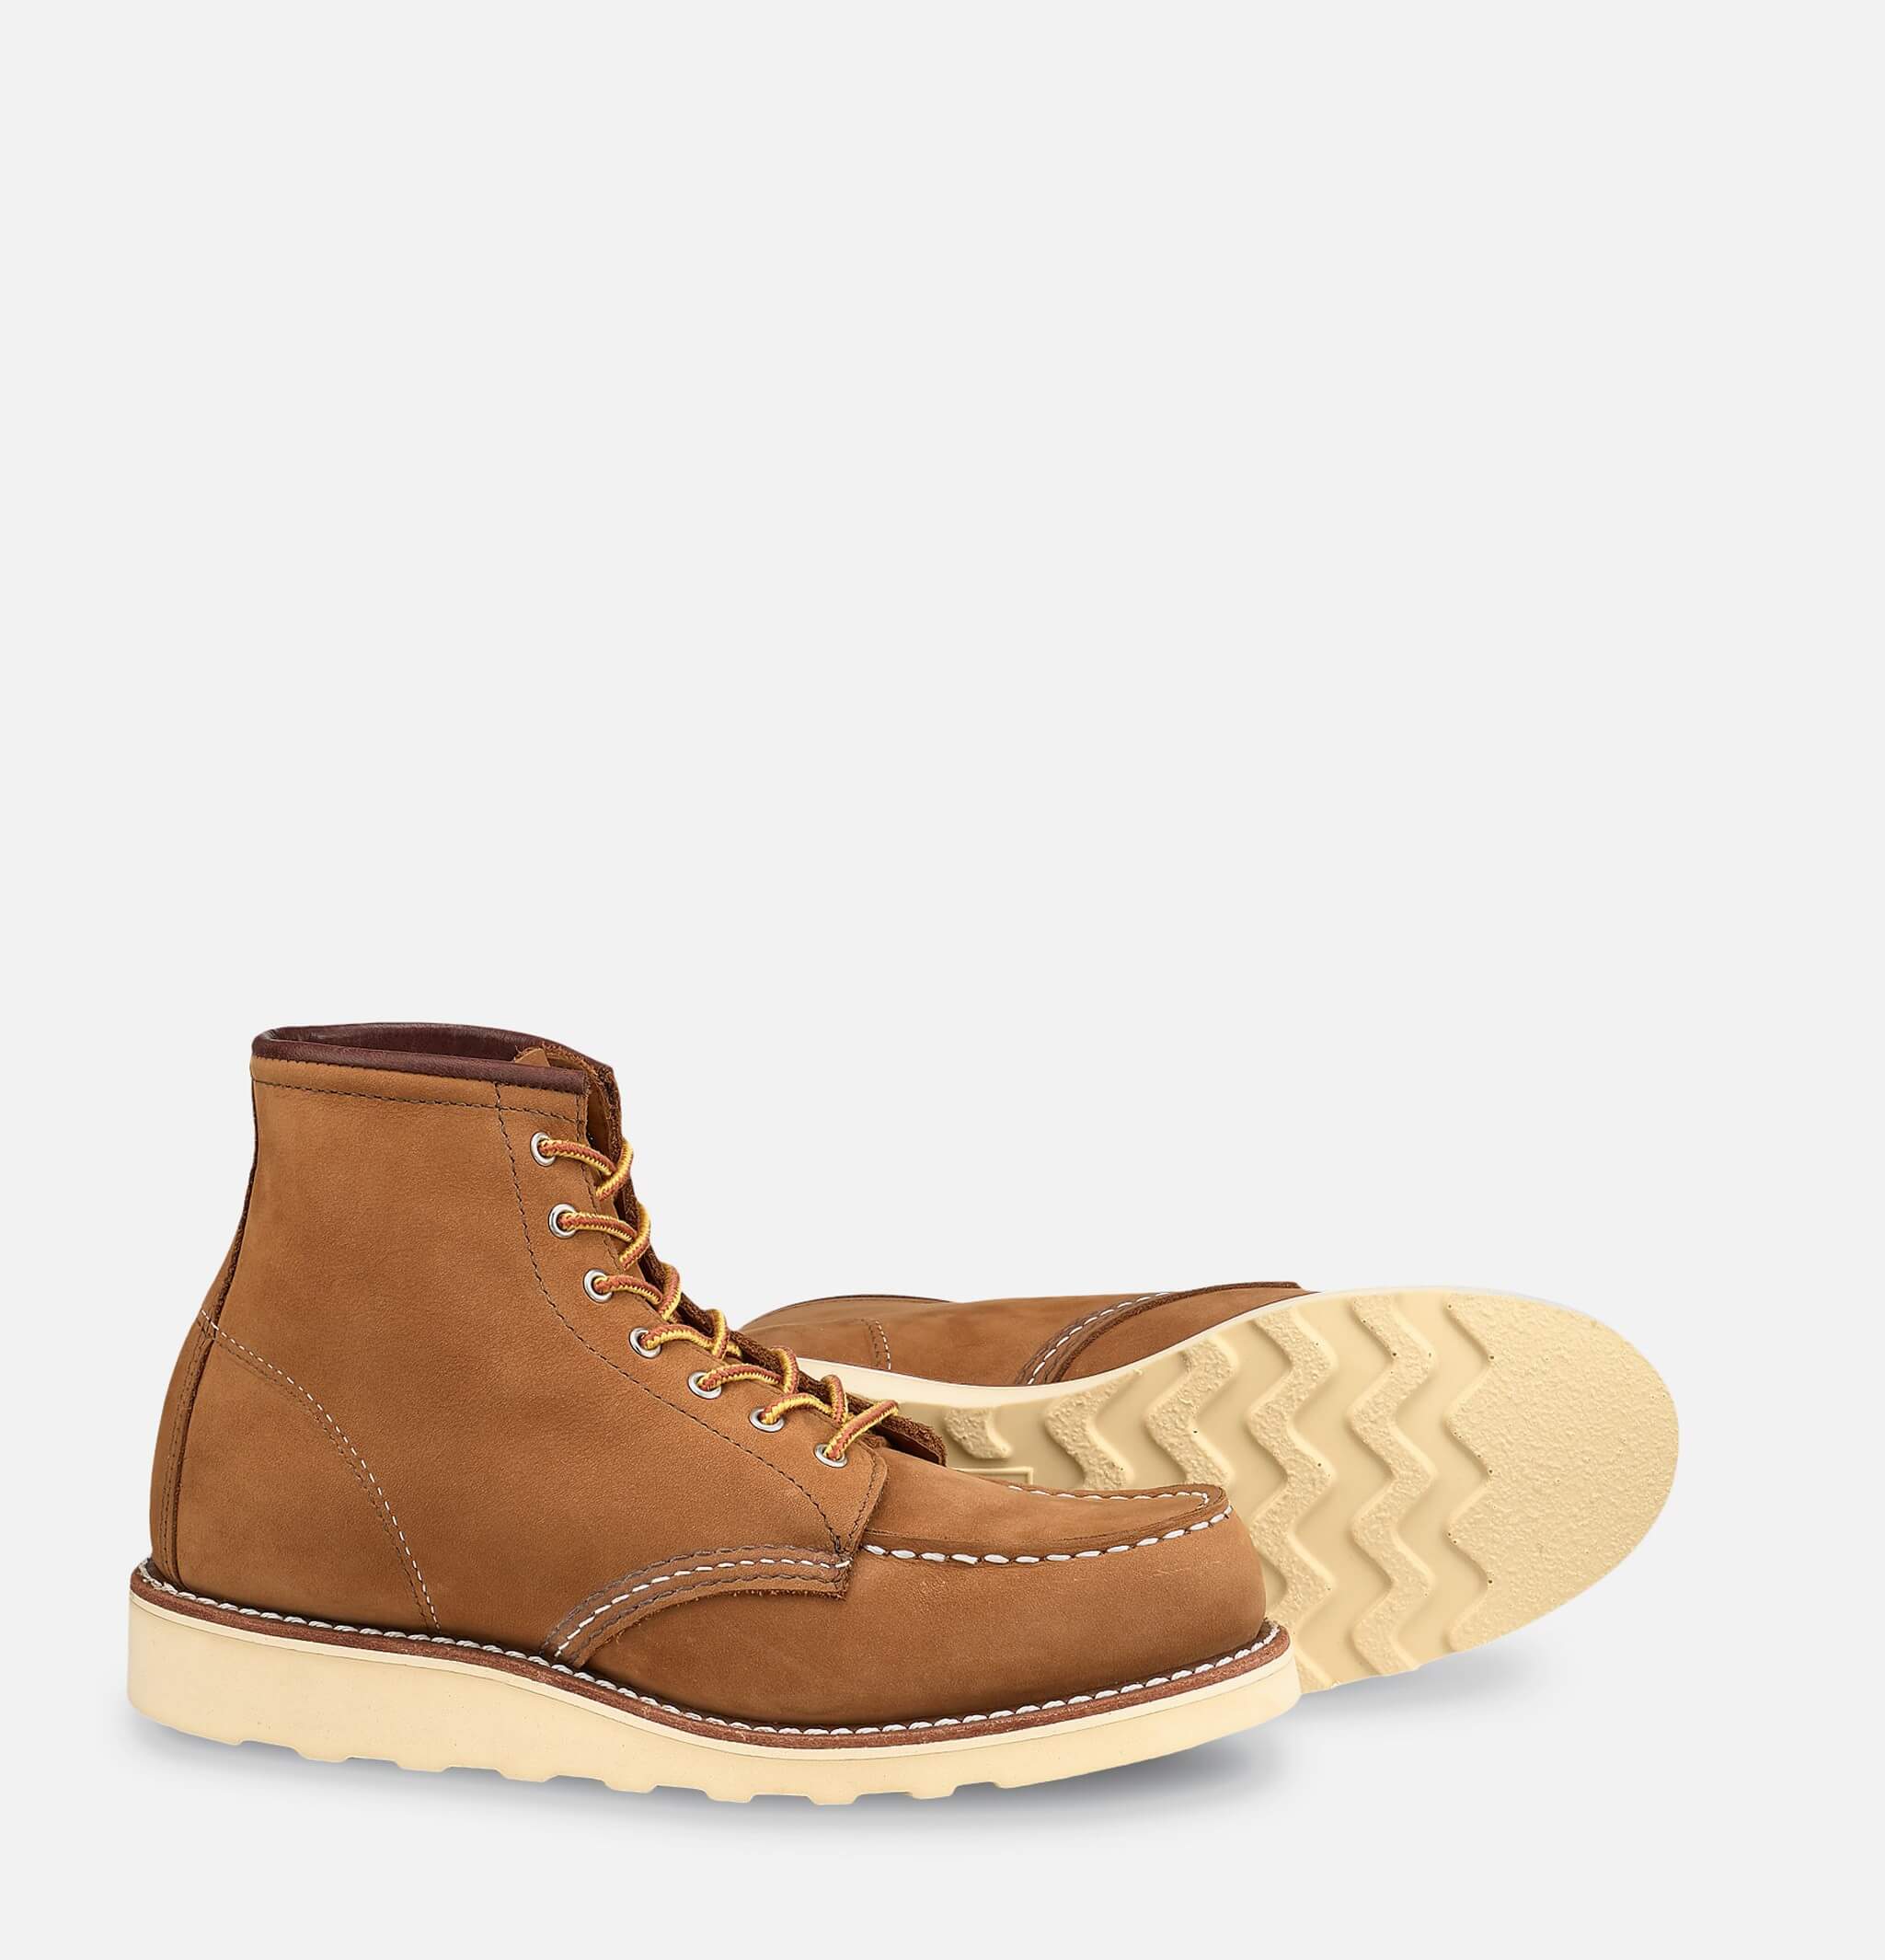 Red Wing Shoes Woman - 3372  Moc Toe Honey